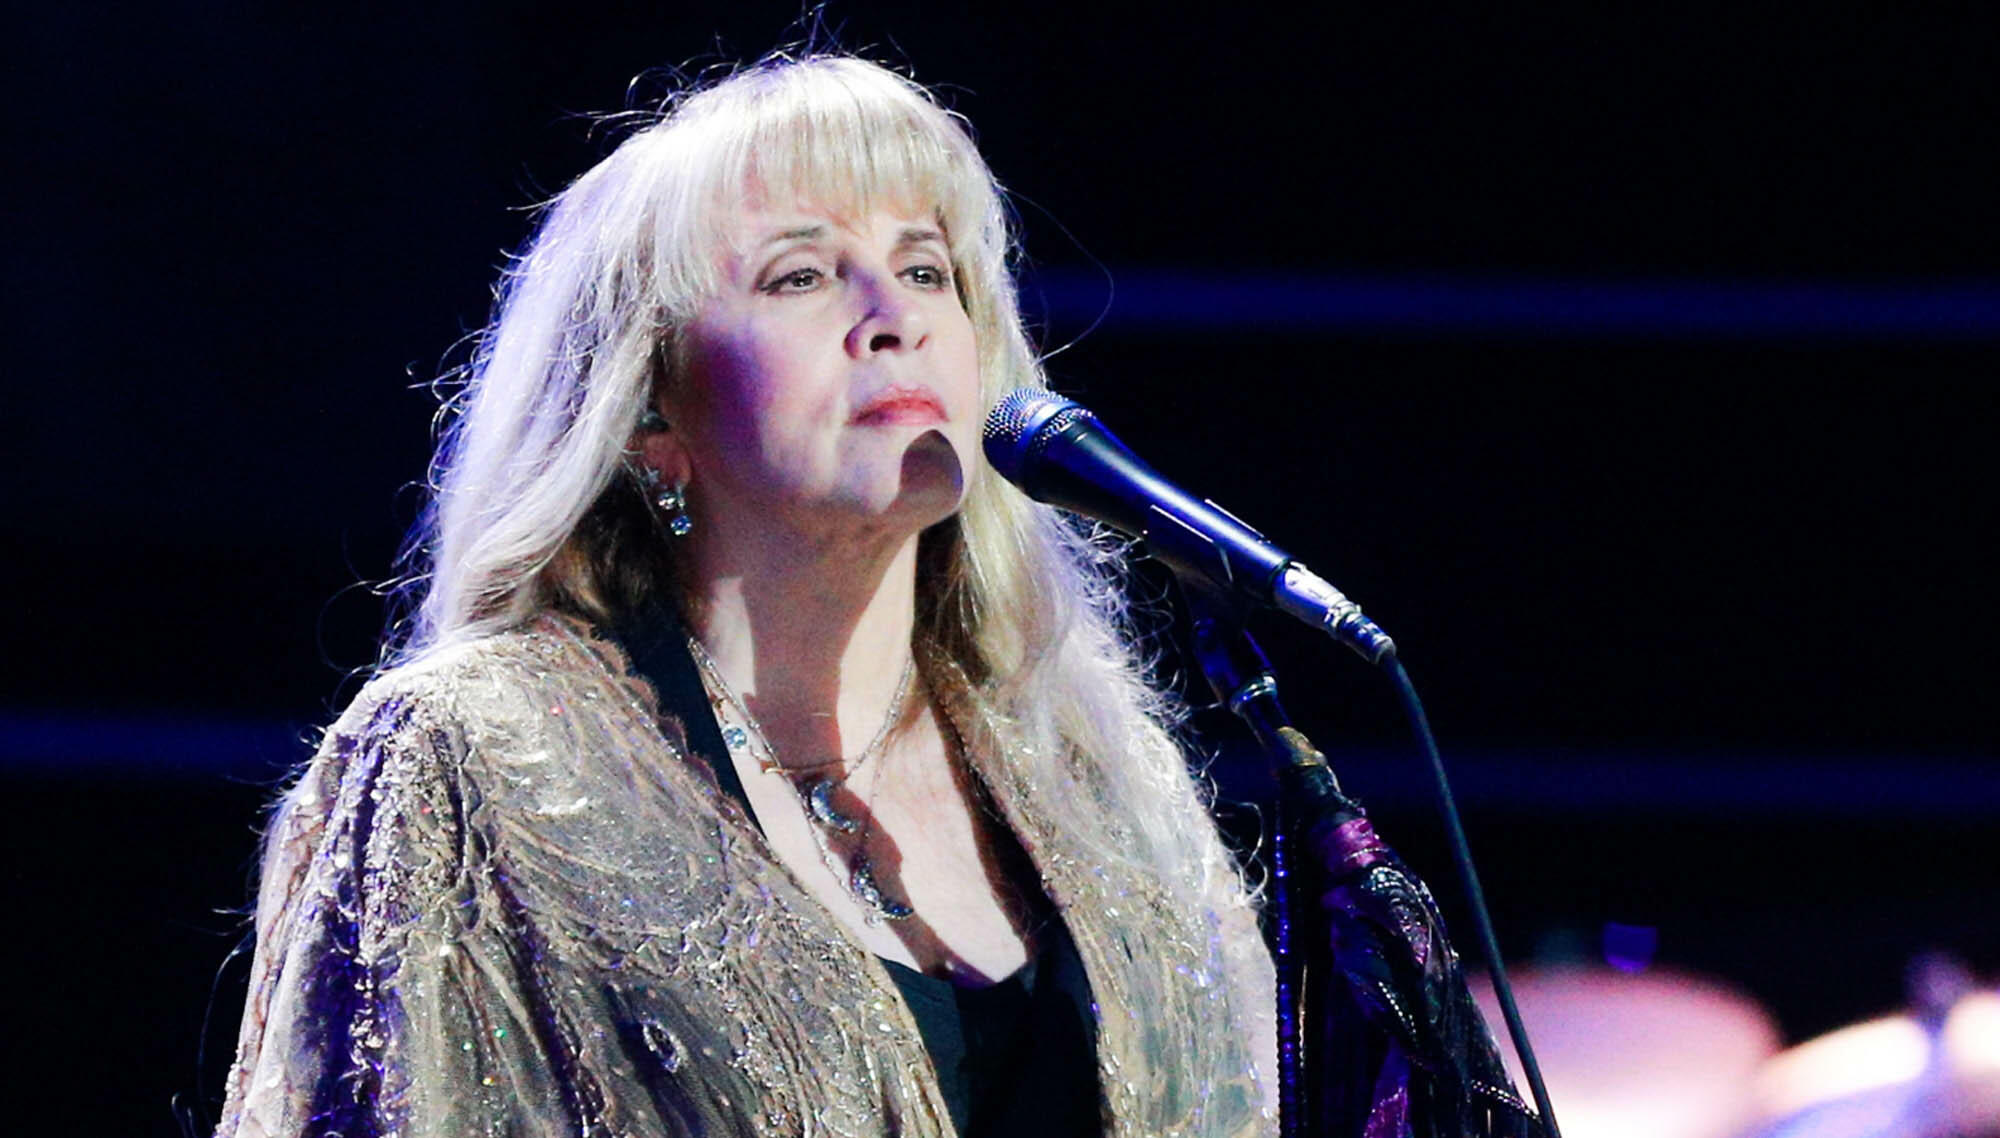 Stevie Nicks Hopes Her Second Rock Hall Induction Has "Opened the Door